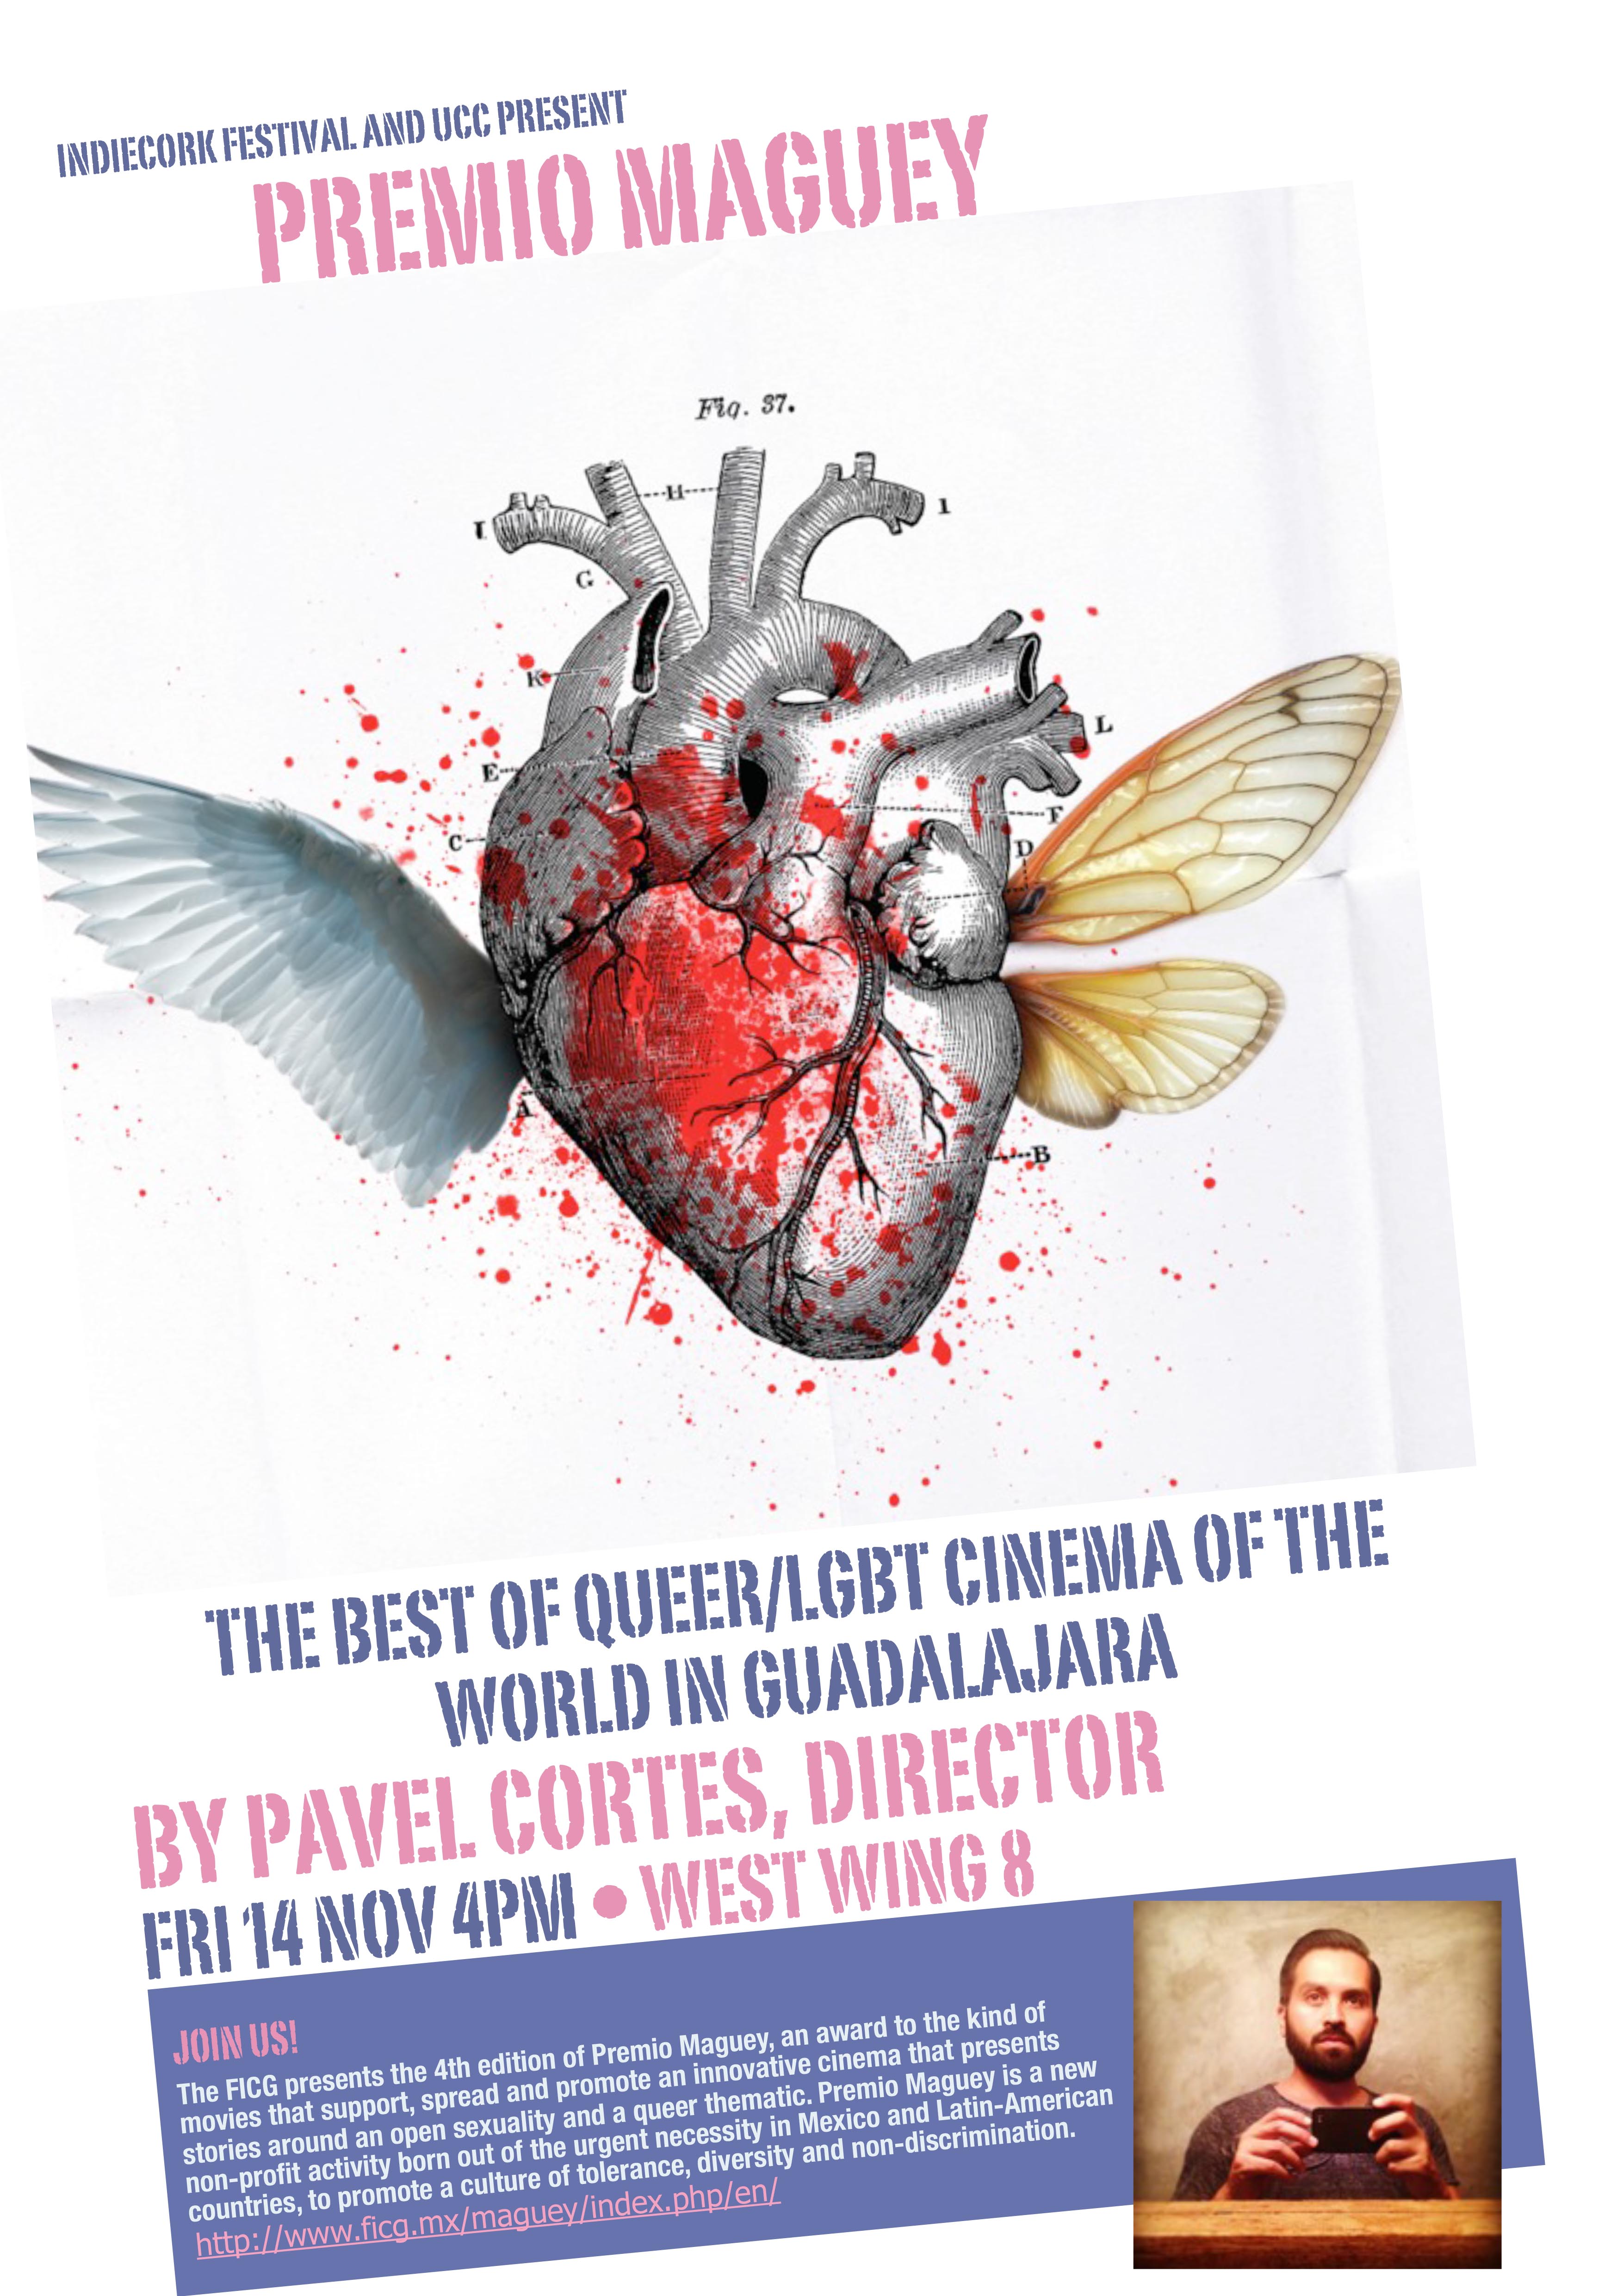 Talk with Pavel Cortés – Director of the Maguey Award